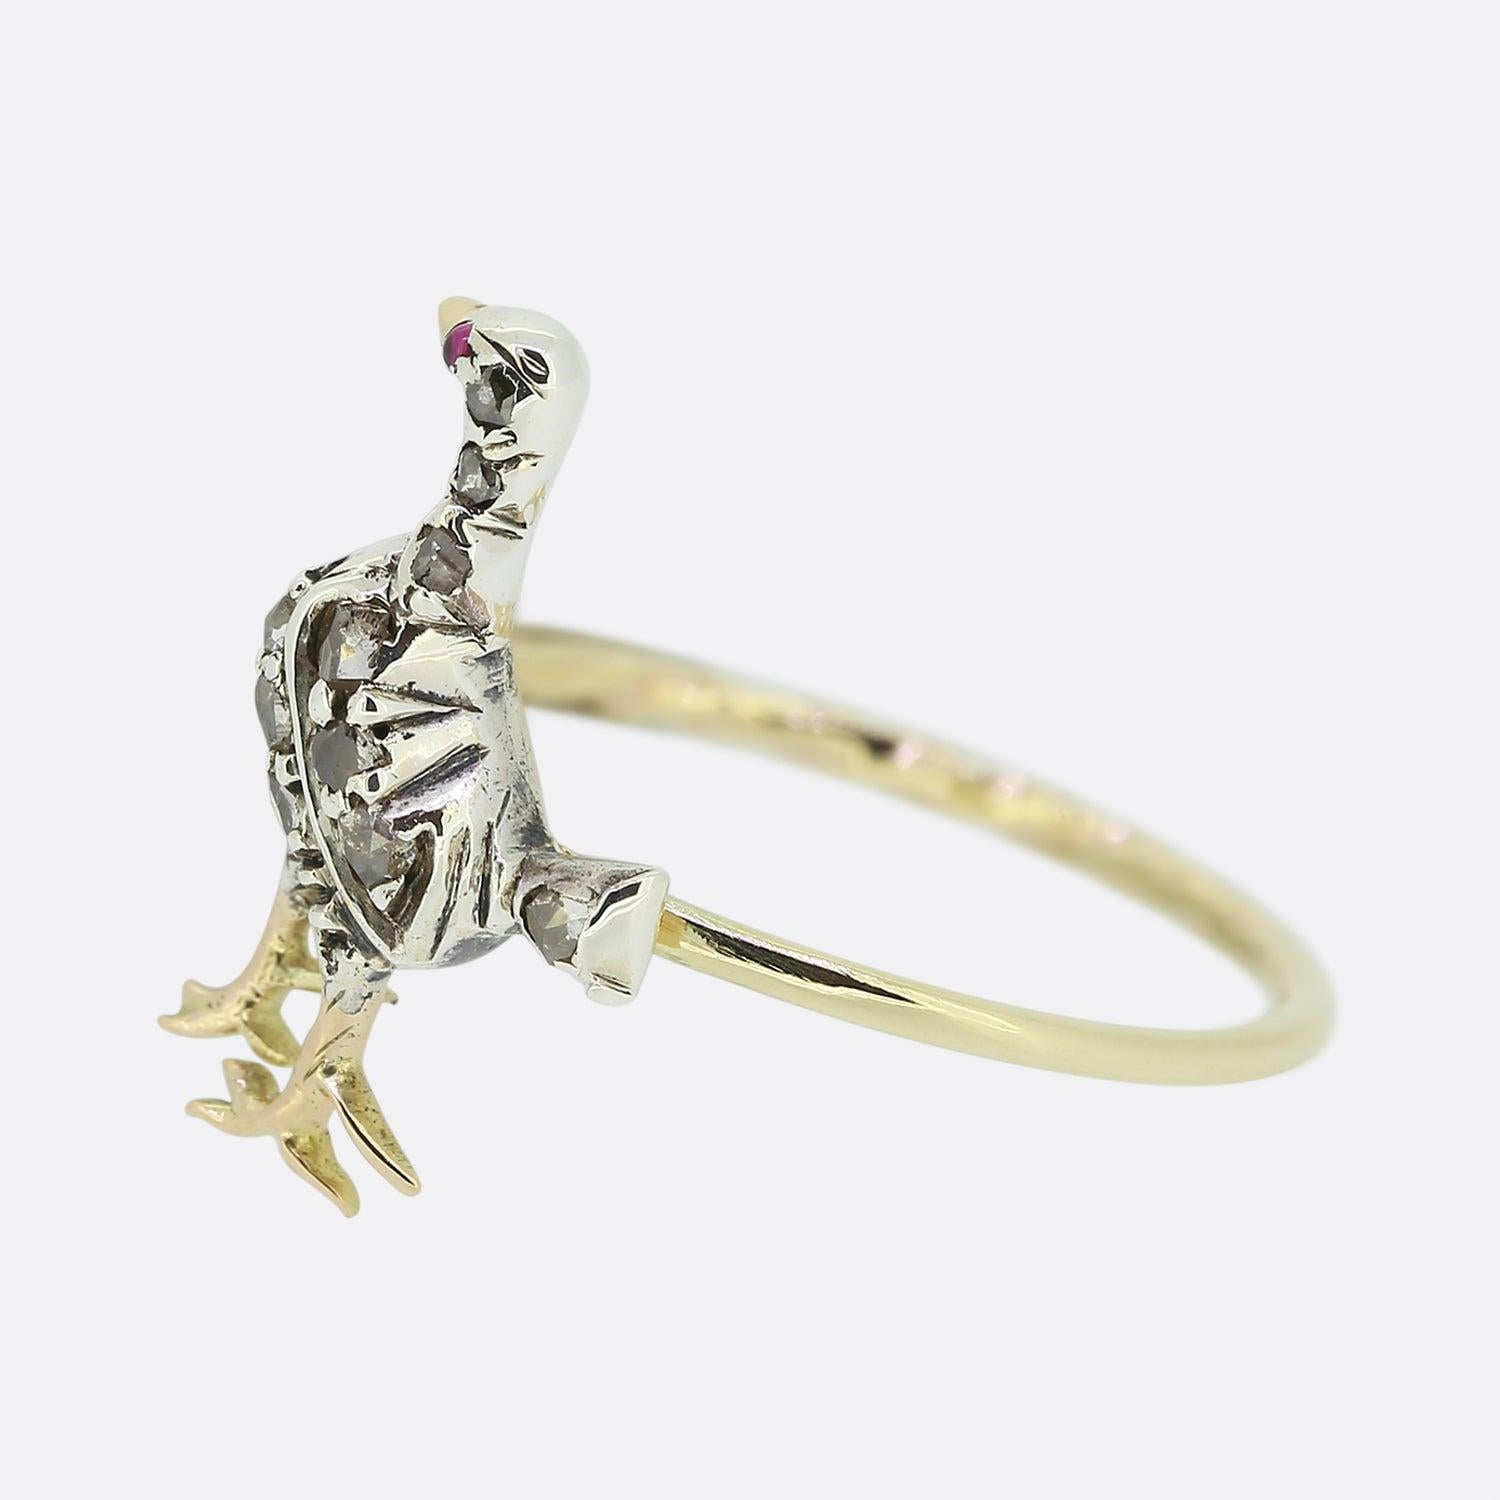 Here we have a quirky endearing piece from originally dating back to the Victorian era. The head of the ring has been expertly crafted from silver into the shape of a pheasant bird showcasing all iconic features; the body of which has been adorned